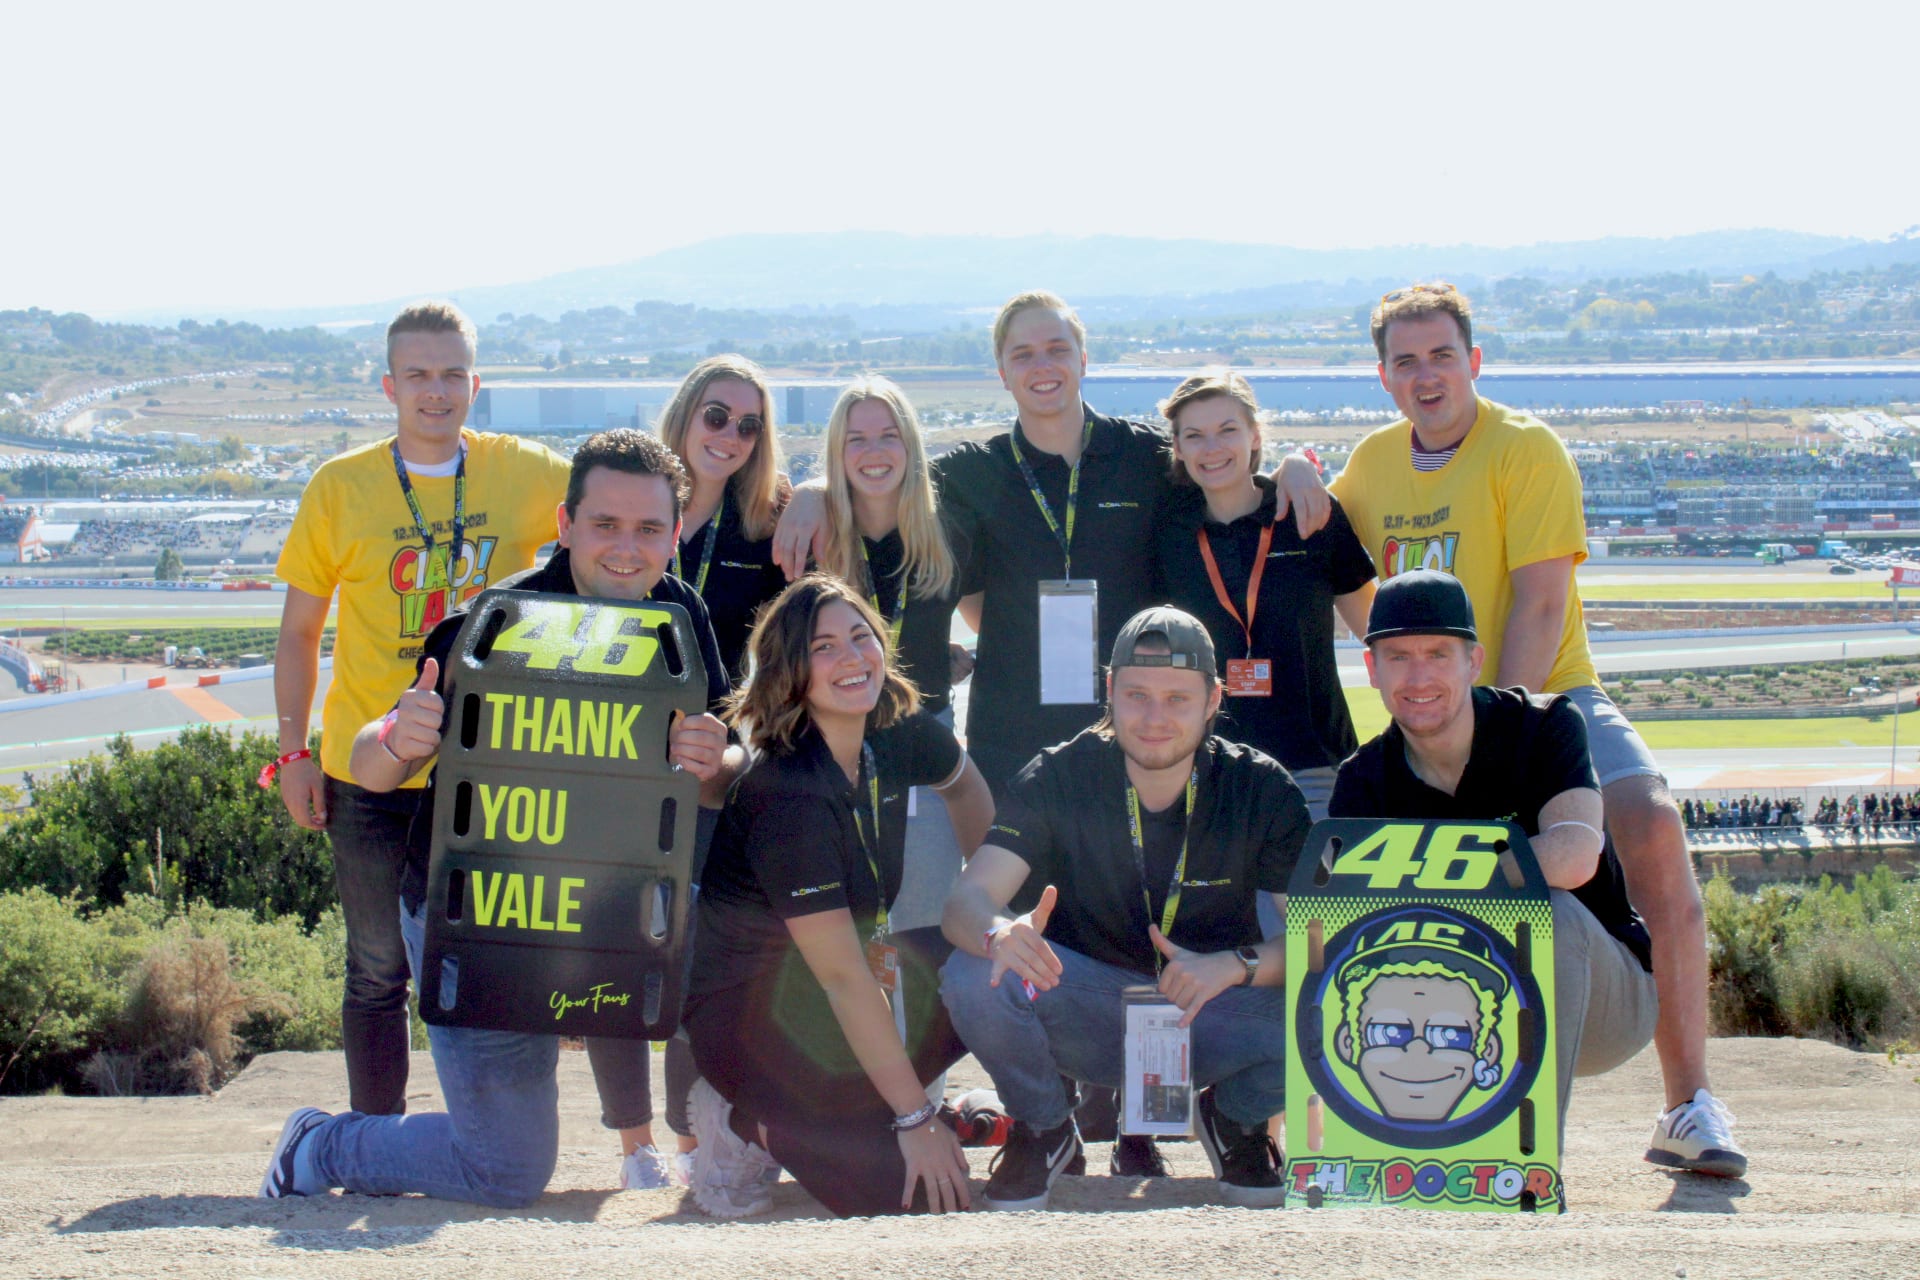 Part of the Global-Tickets Team at the Formula 1 Spielberg